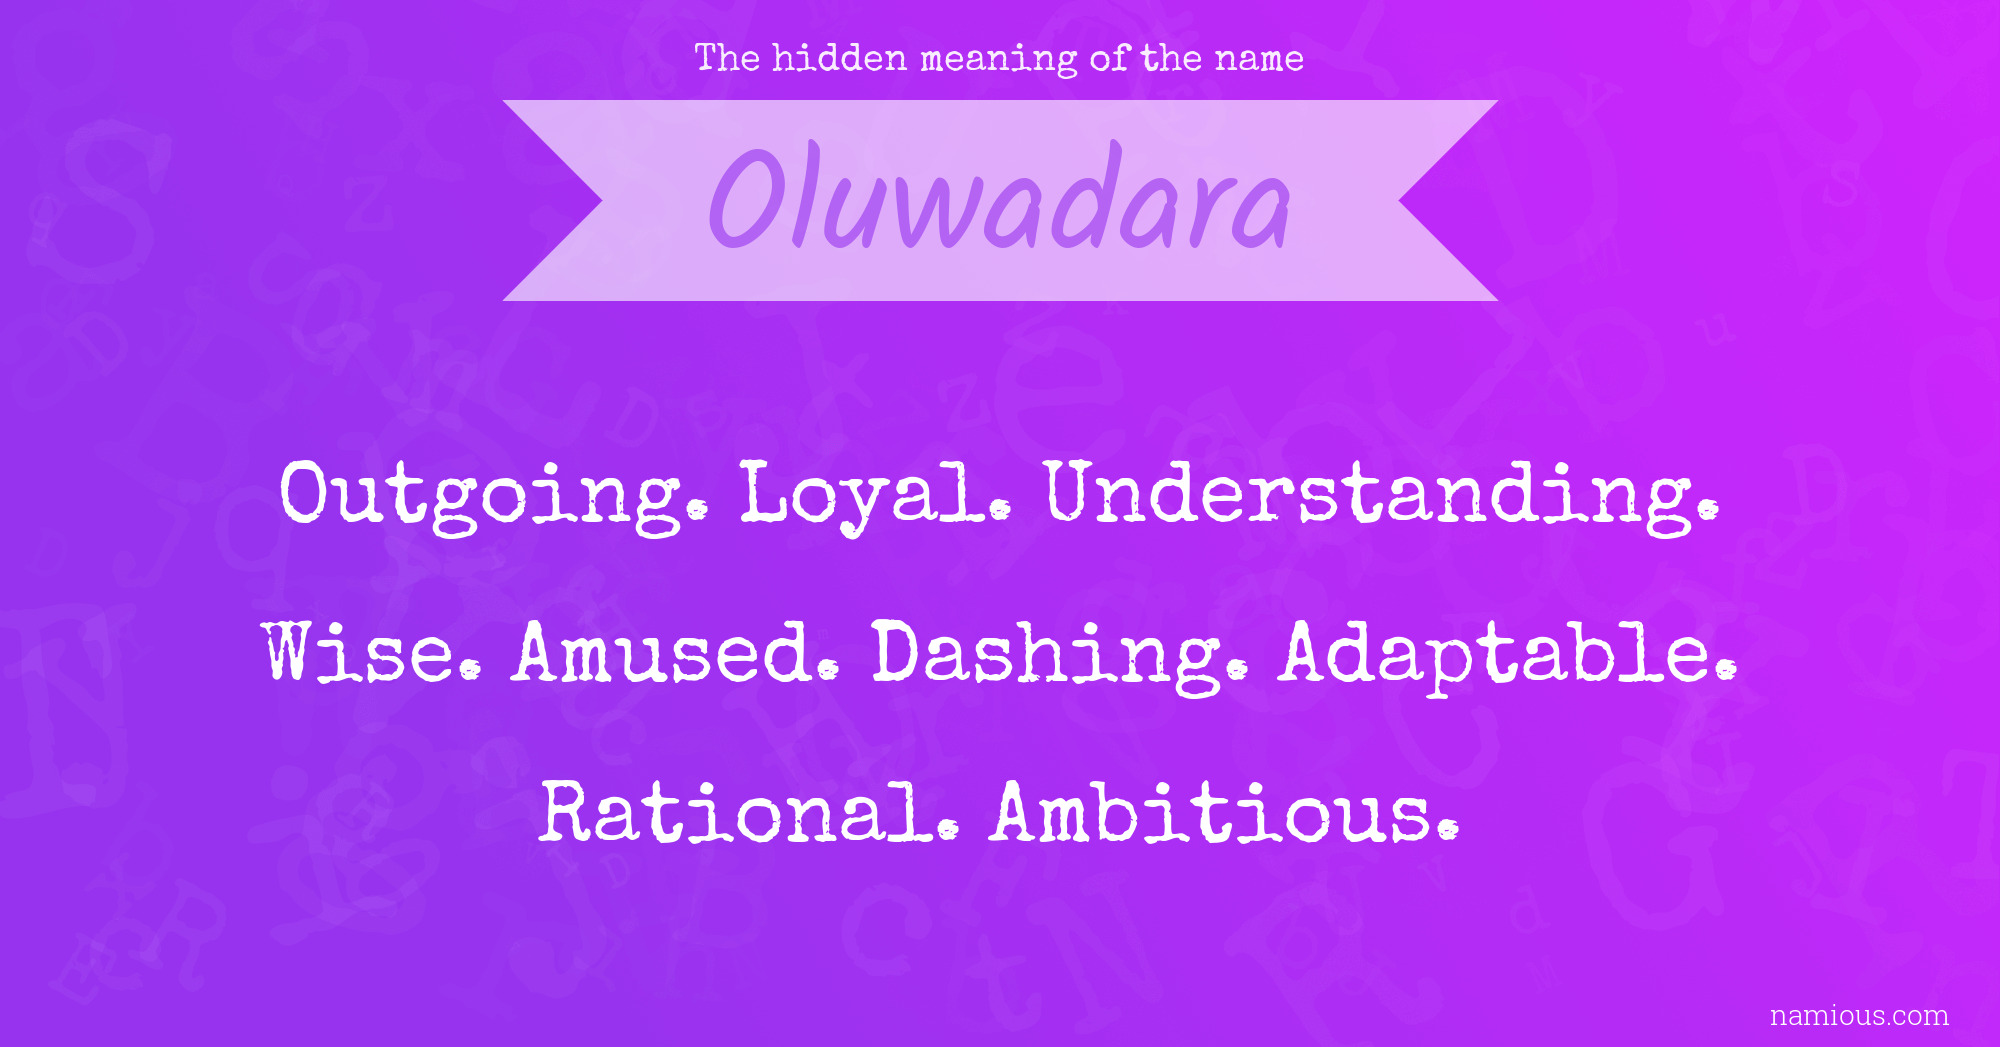 The hidden meaning of the name Oluwadara